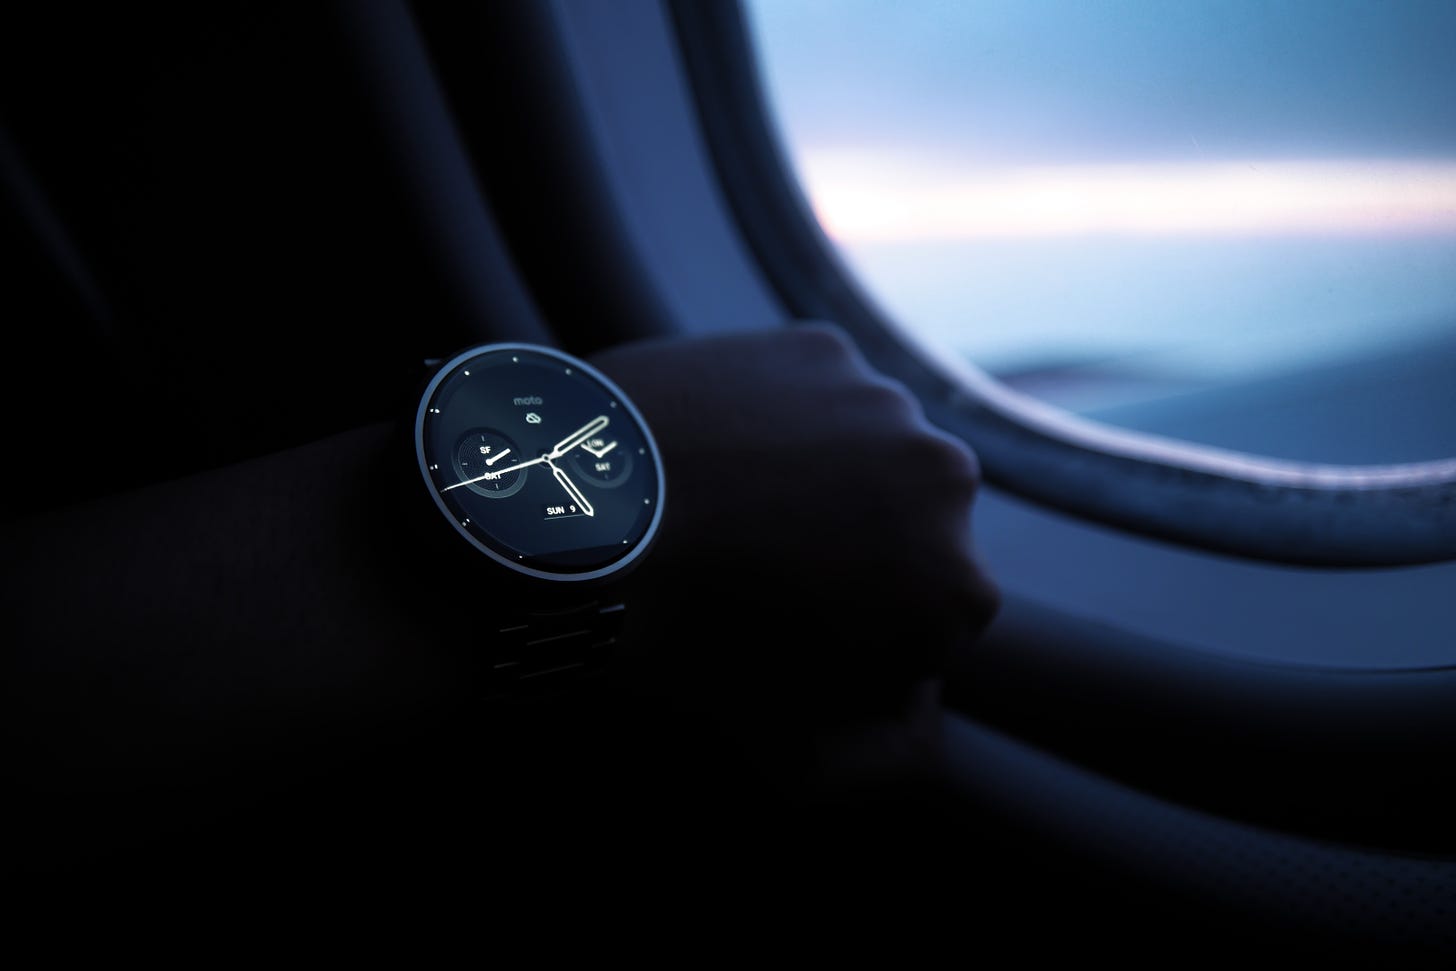 looking at an analog watch on a night flight